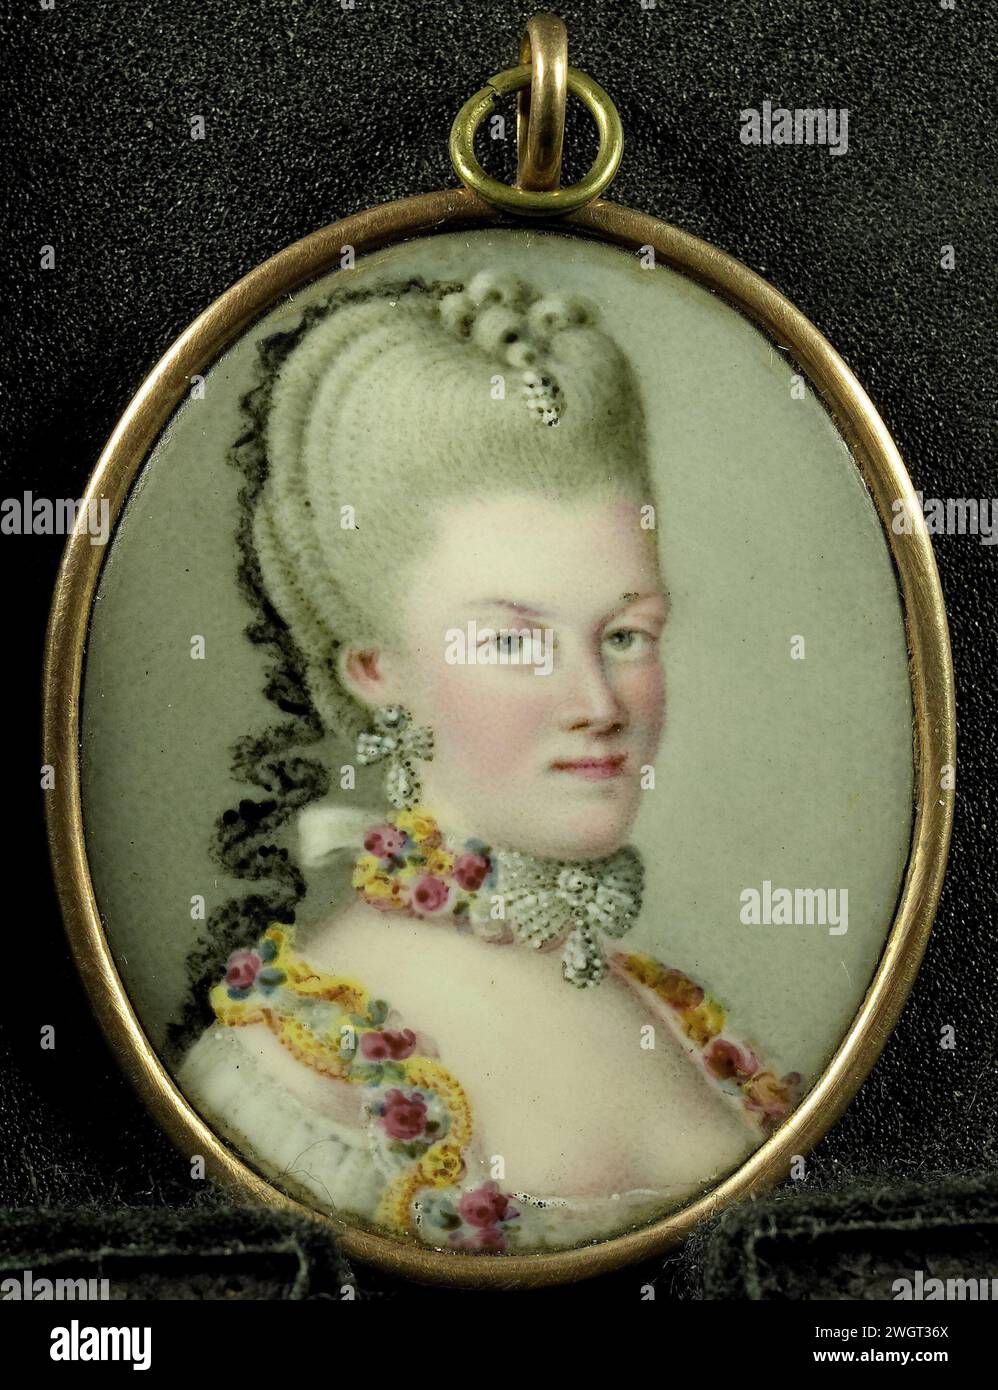 Frederika Sophia Wilhelmina (1751-1820), princess of Prussia, wife of Prince Willem V, Anonymous, c. 1775 miniature (painting) Portrait of Frederika Sophia Wilhelmina (1751-1820), princess of Prussia, wife of Prince Willem V. Buste, to the right, the viewer prospective. Part of the portrait miniatures collection. Holland copper (metal). Stock Photo